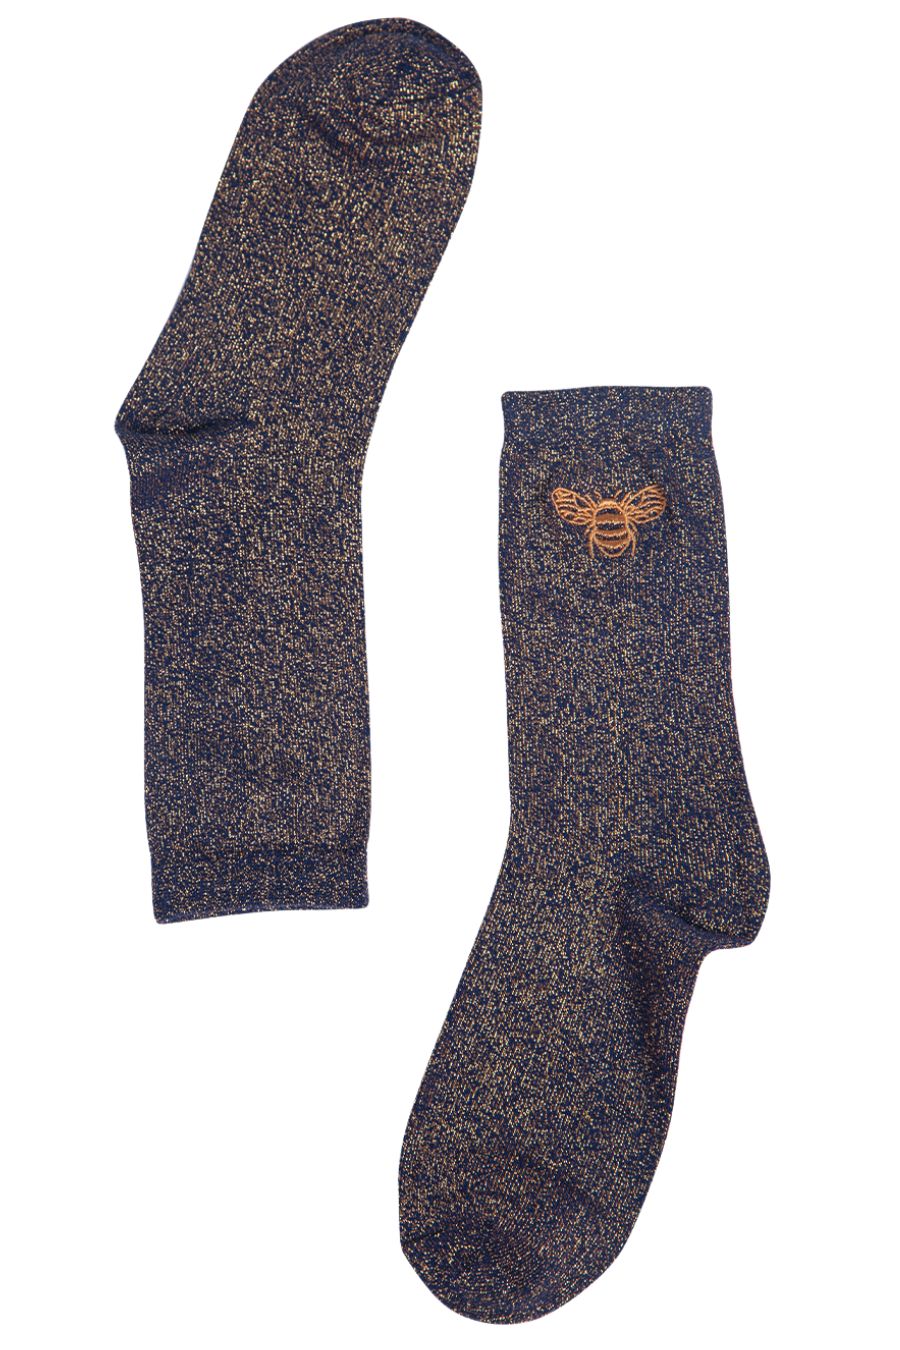 navy blue, gold glitter ankle socks with a gold embroidered bee